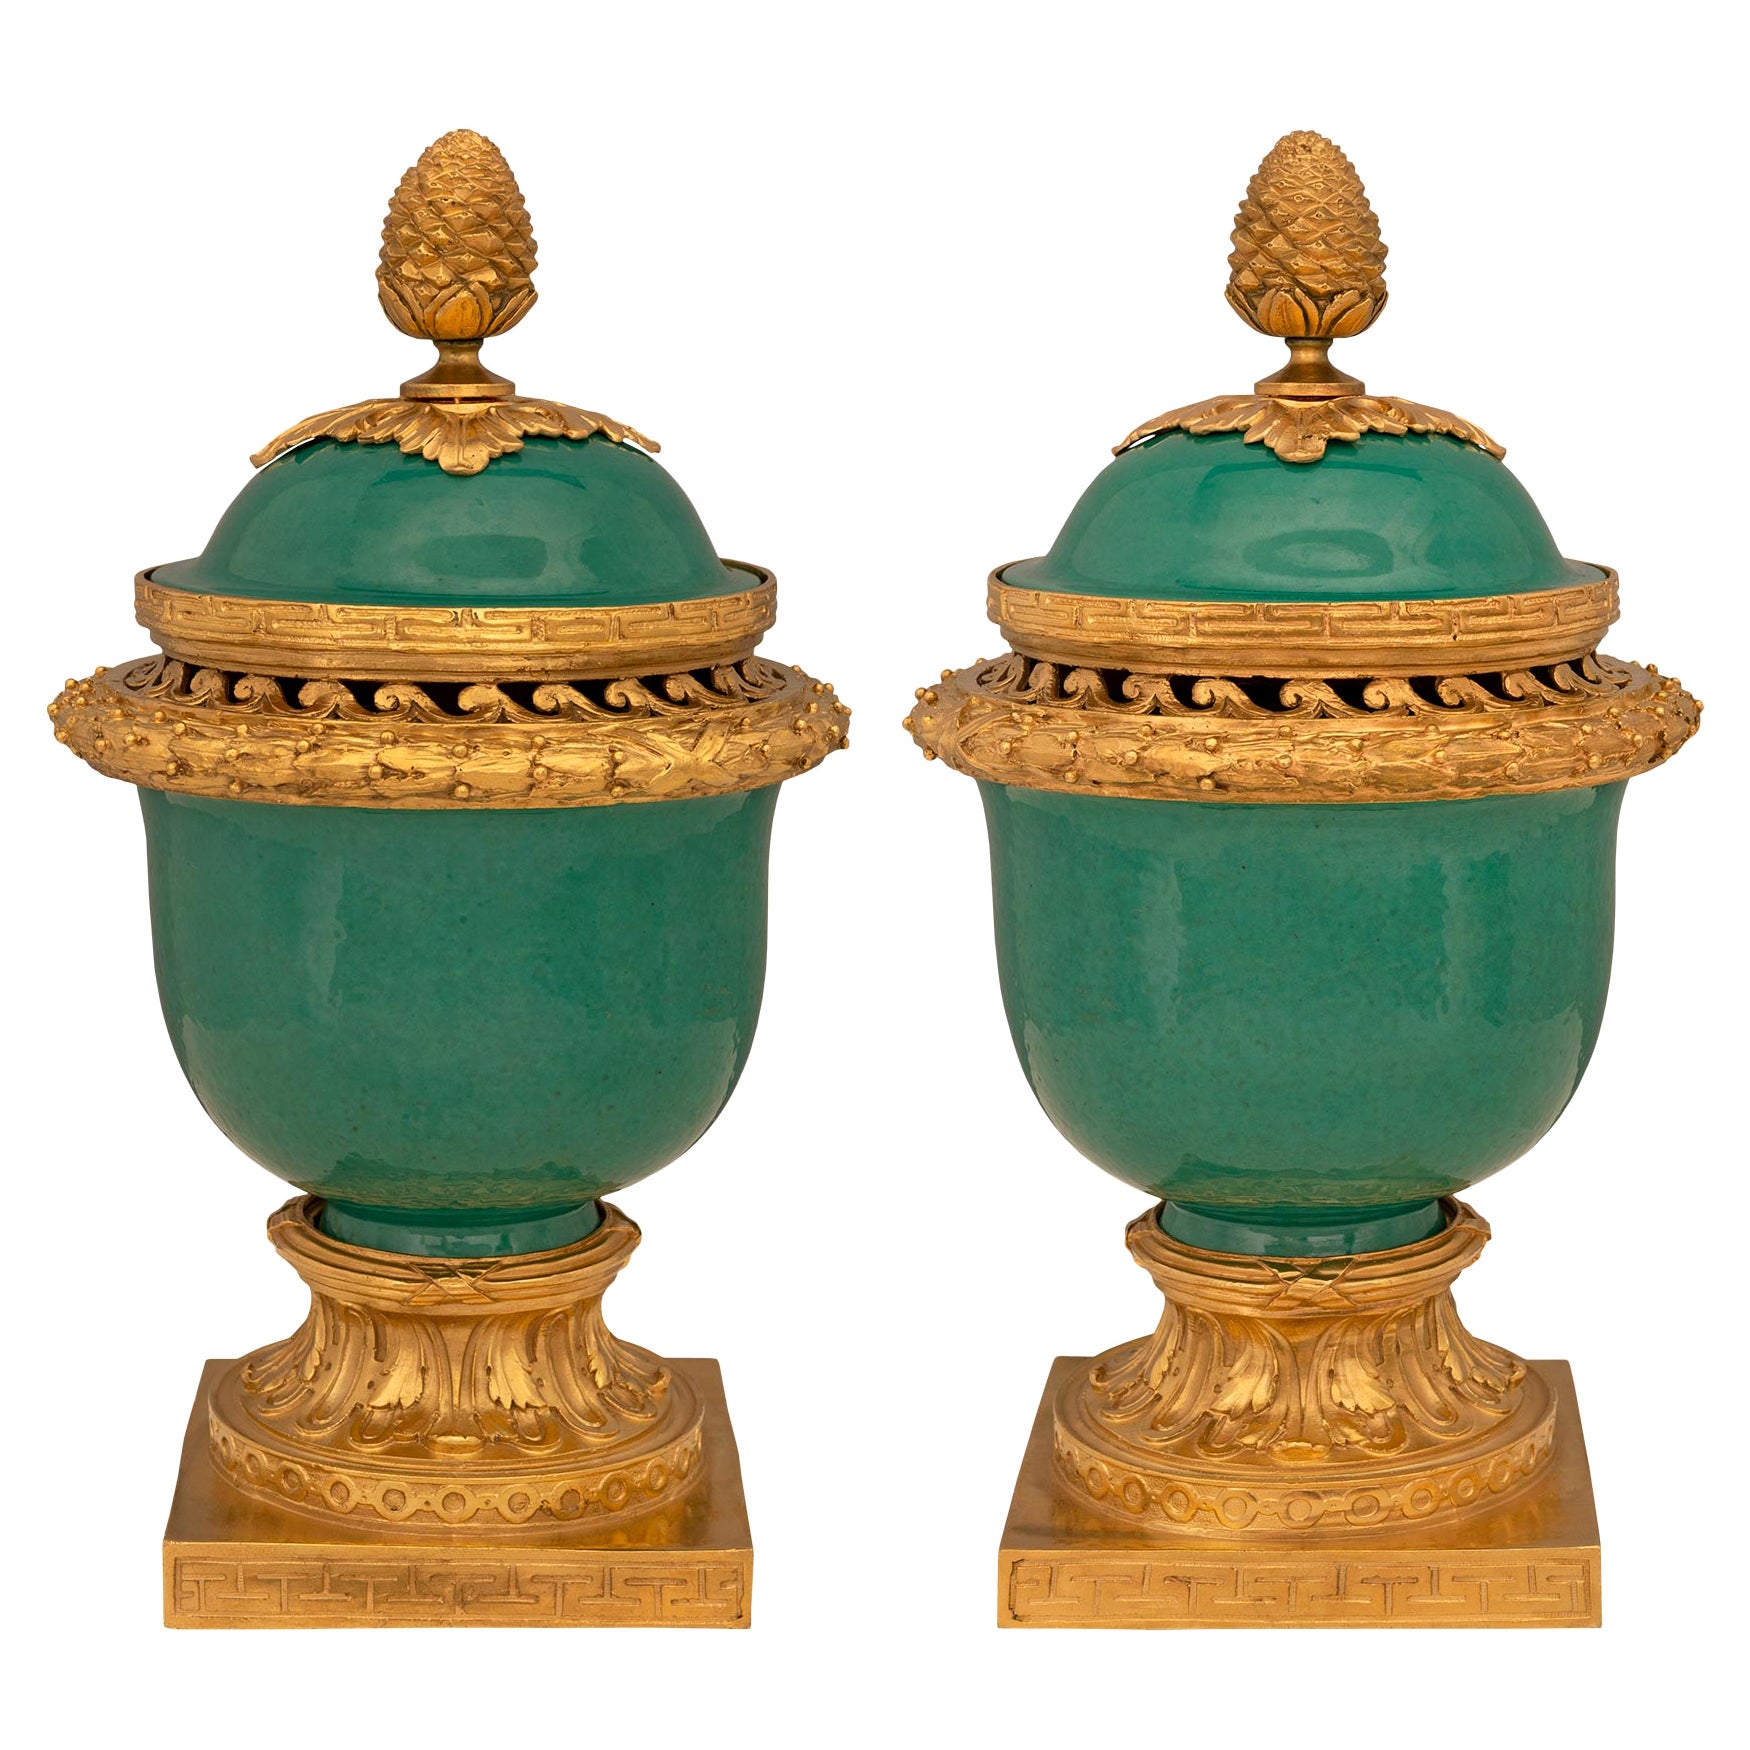 Pair of French 19th Century Louis XVI St. Porcelain and Ormolu Lidded Urns